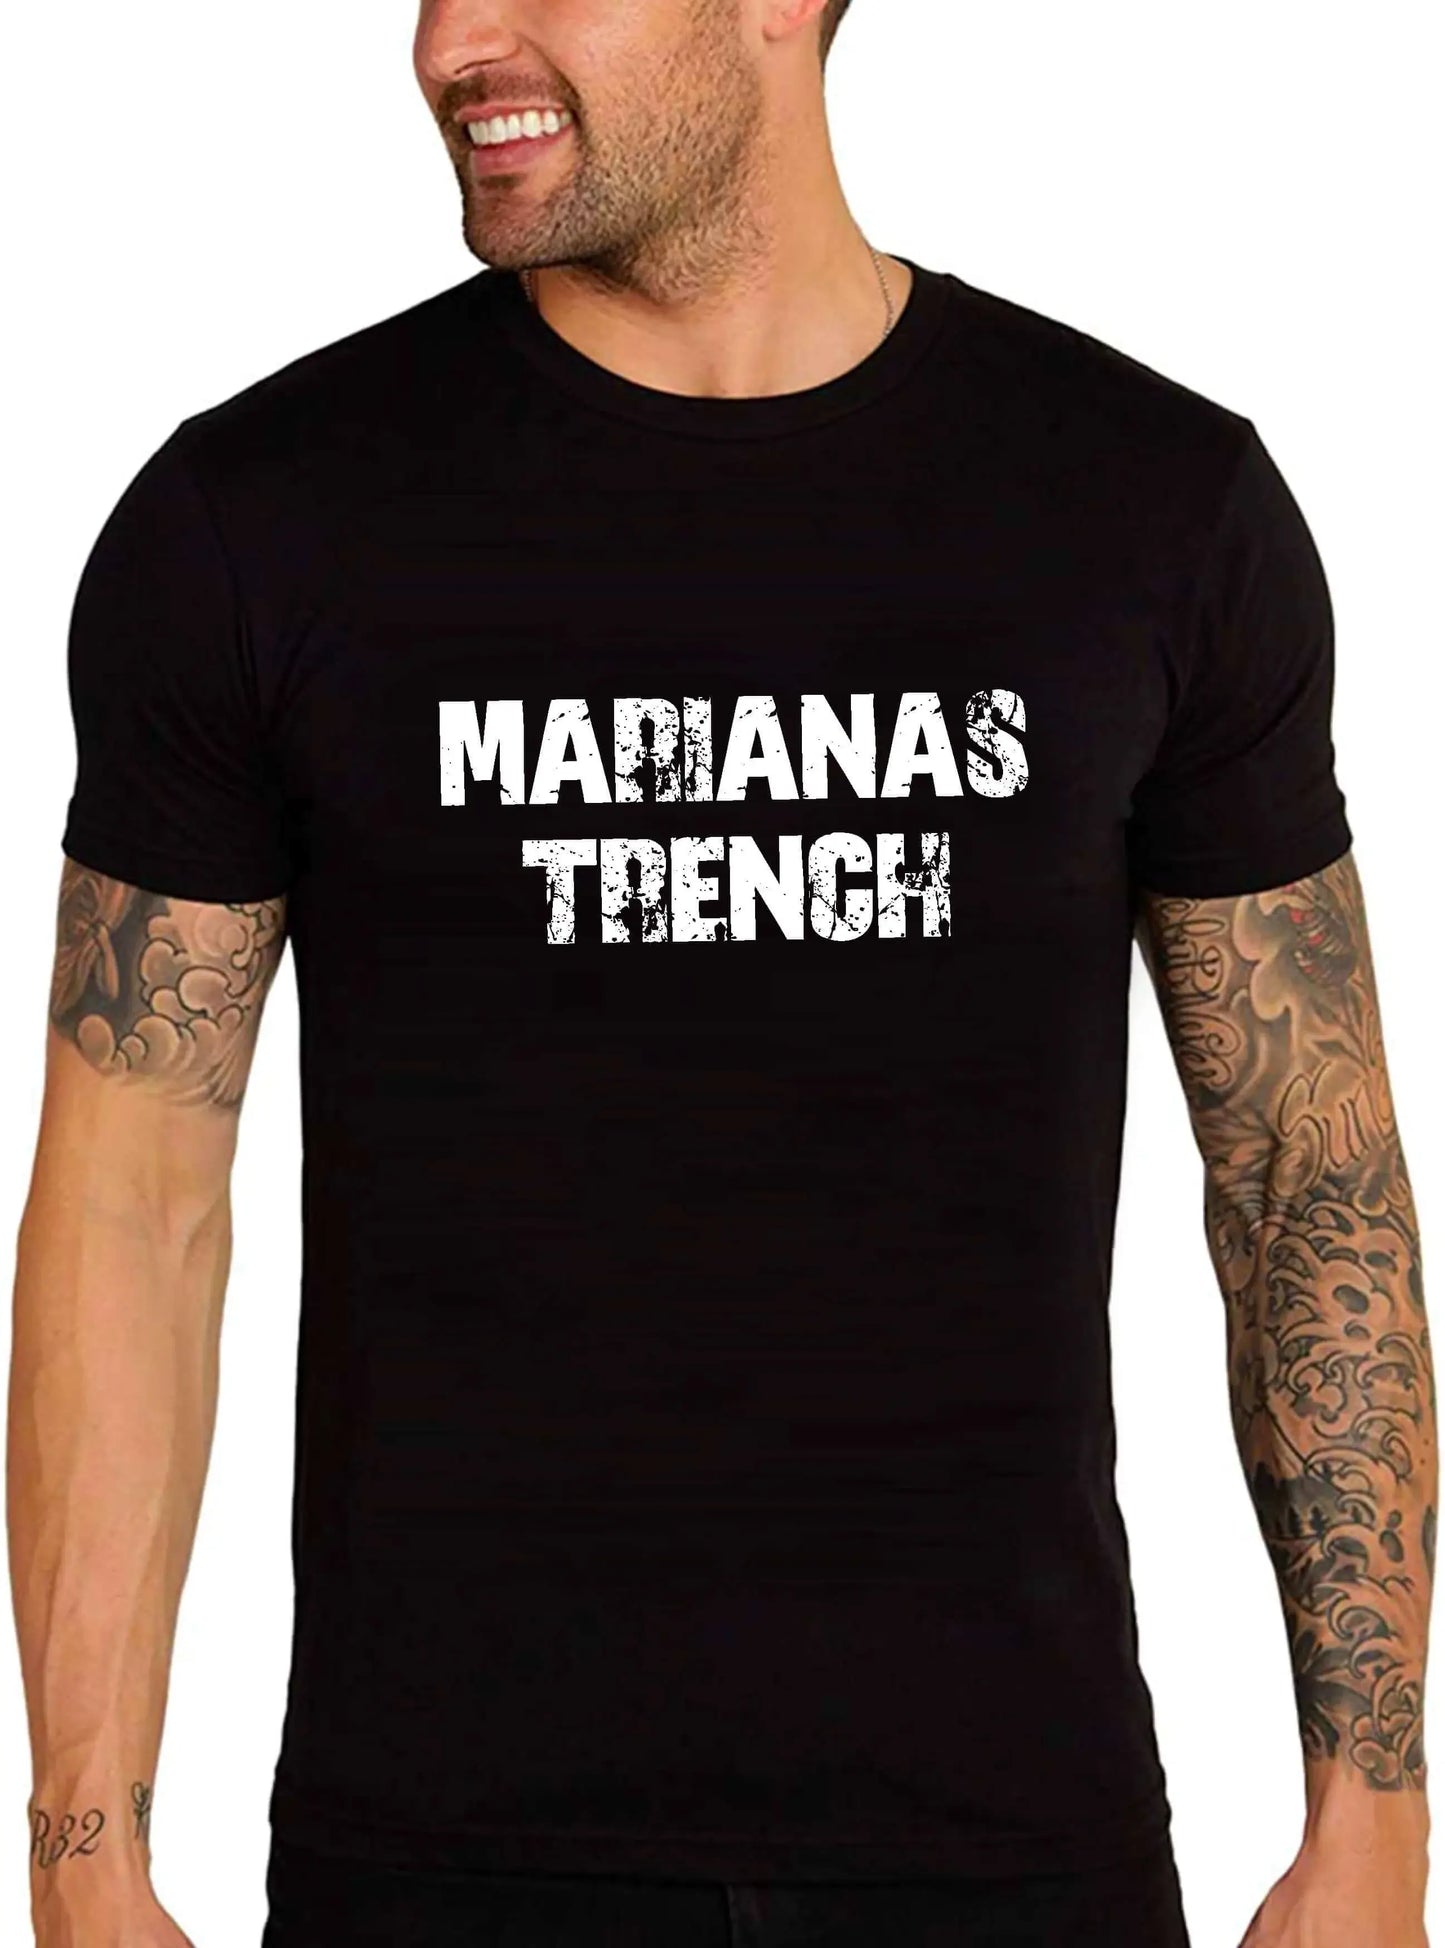 Men's Graphic T-Shirt Marianas Trench Eco-Friendly Limited Edition Short Sleeve Tee-Shirt Vintage Birthday Gift Novelty